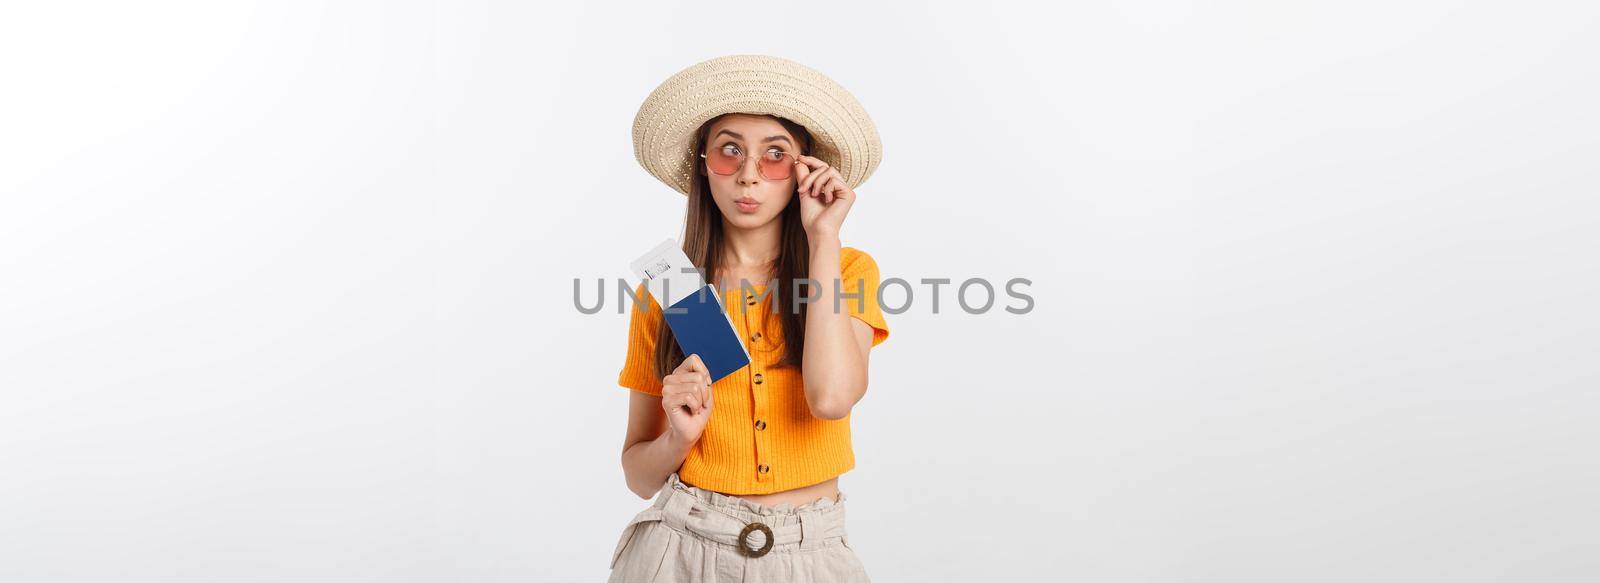 Portrait of happy tourist woman holding passport on holiday on white background